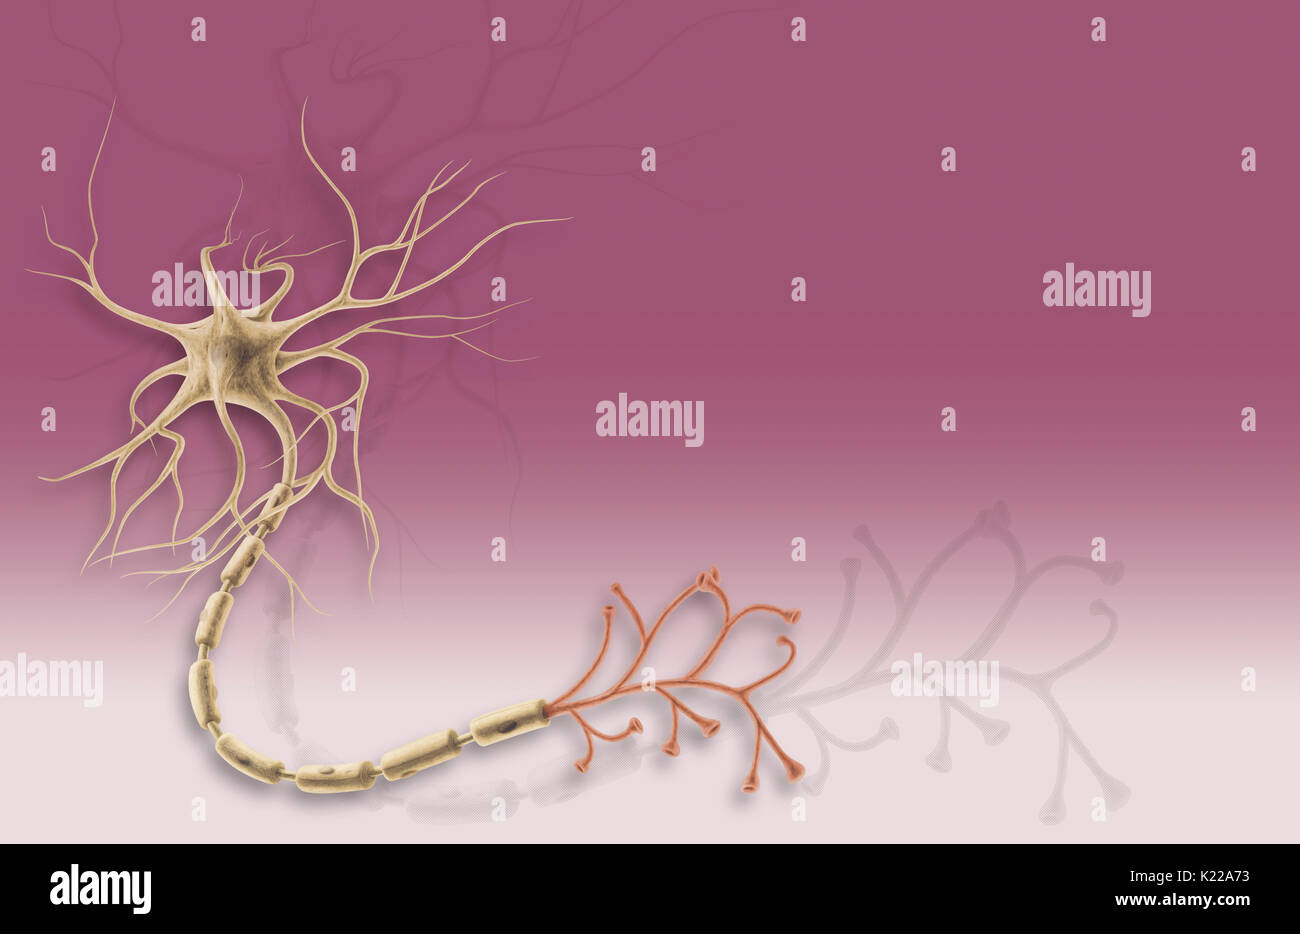 It has short dendrites and one long axon. Stock Photo